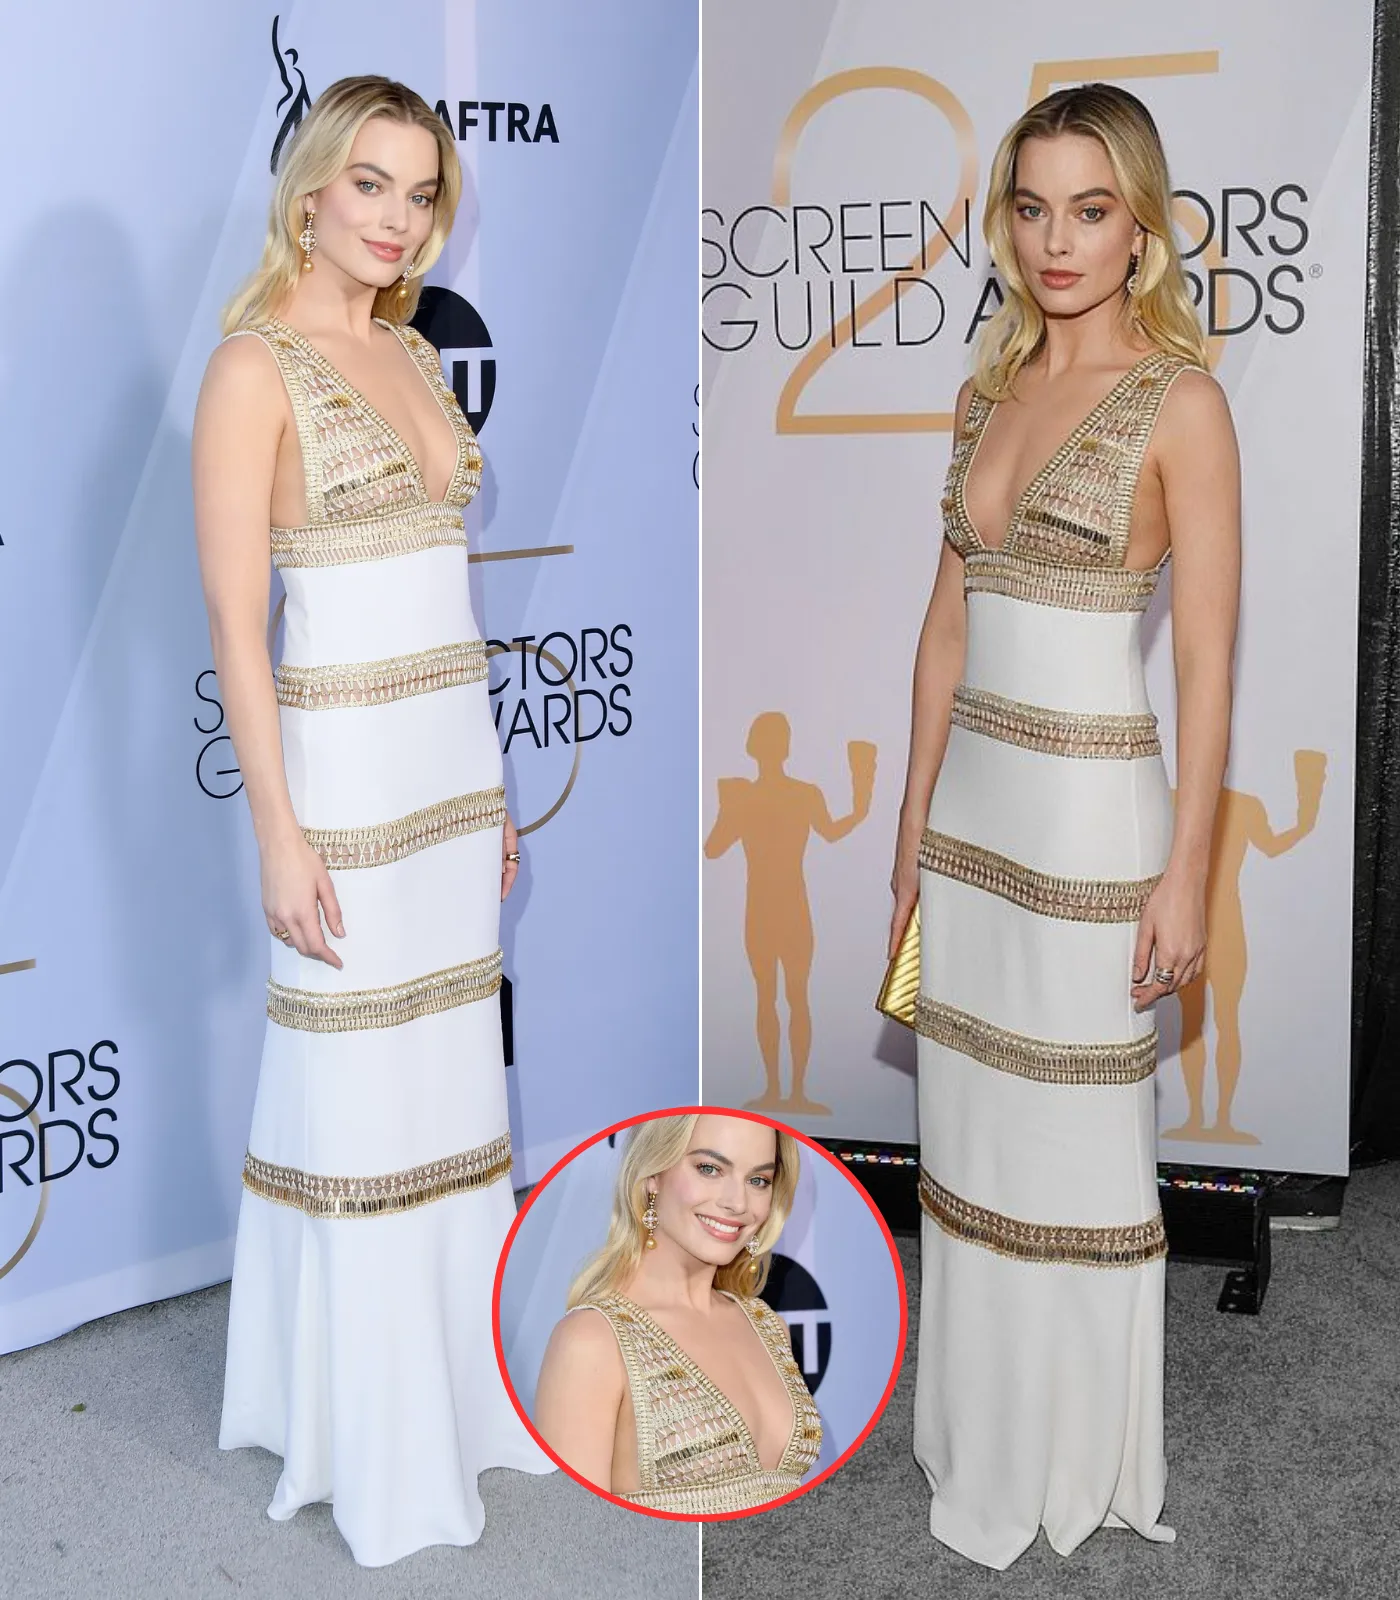 Margot Robbie stuns in plunging white-and-gold gown as she arrives at the SAG Awards in Los Angeles